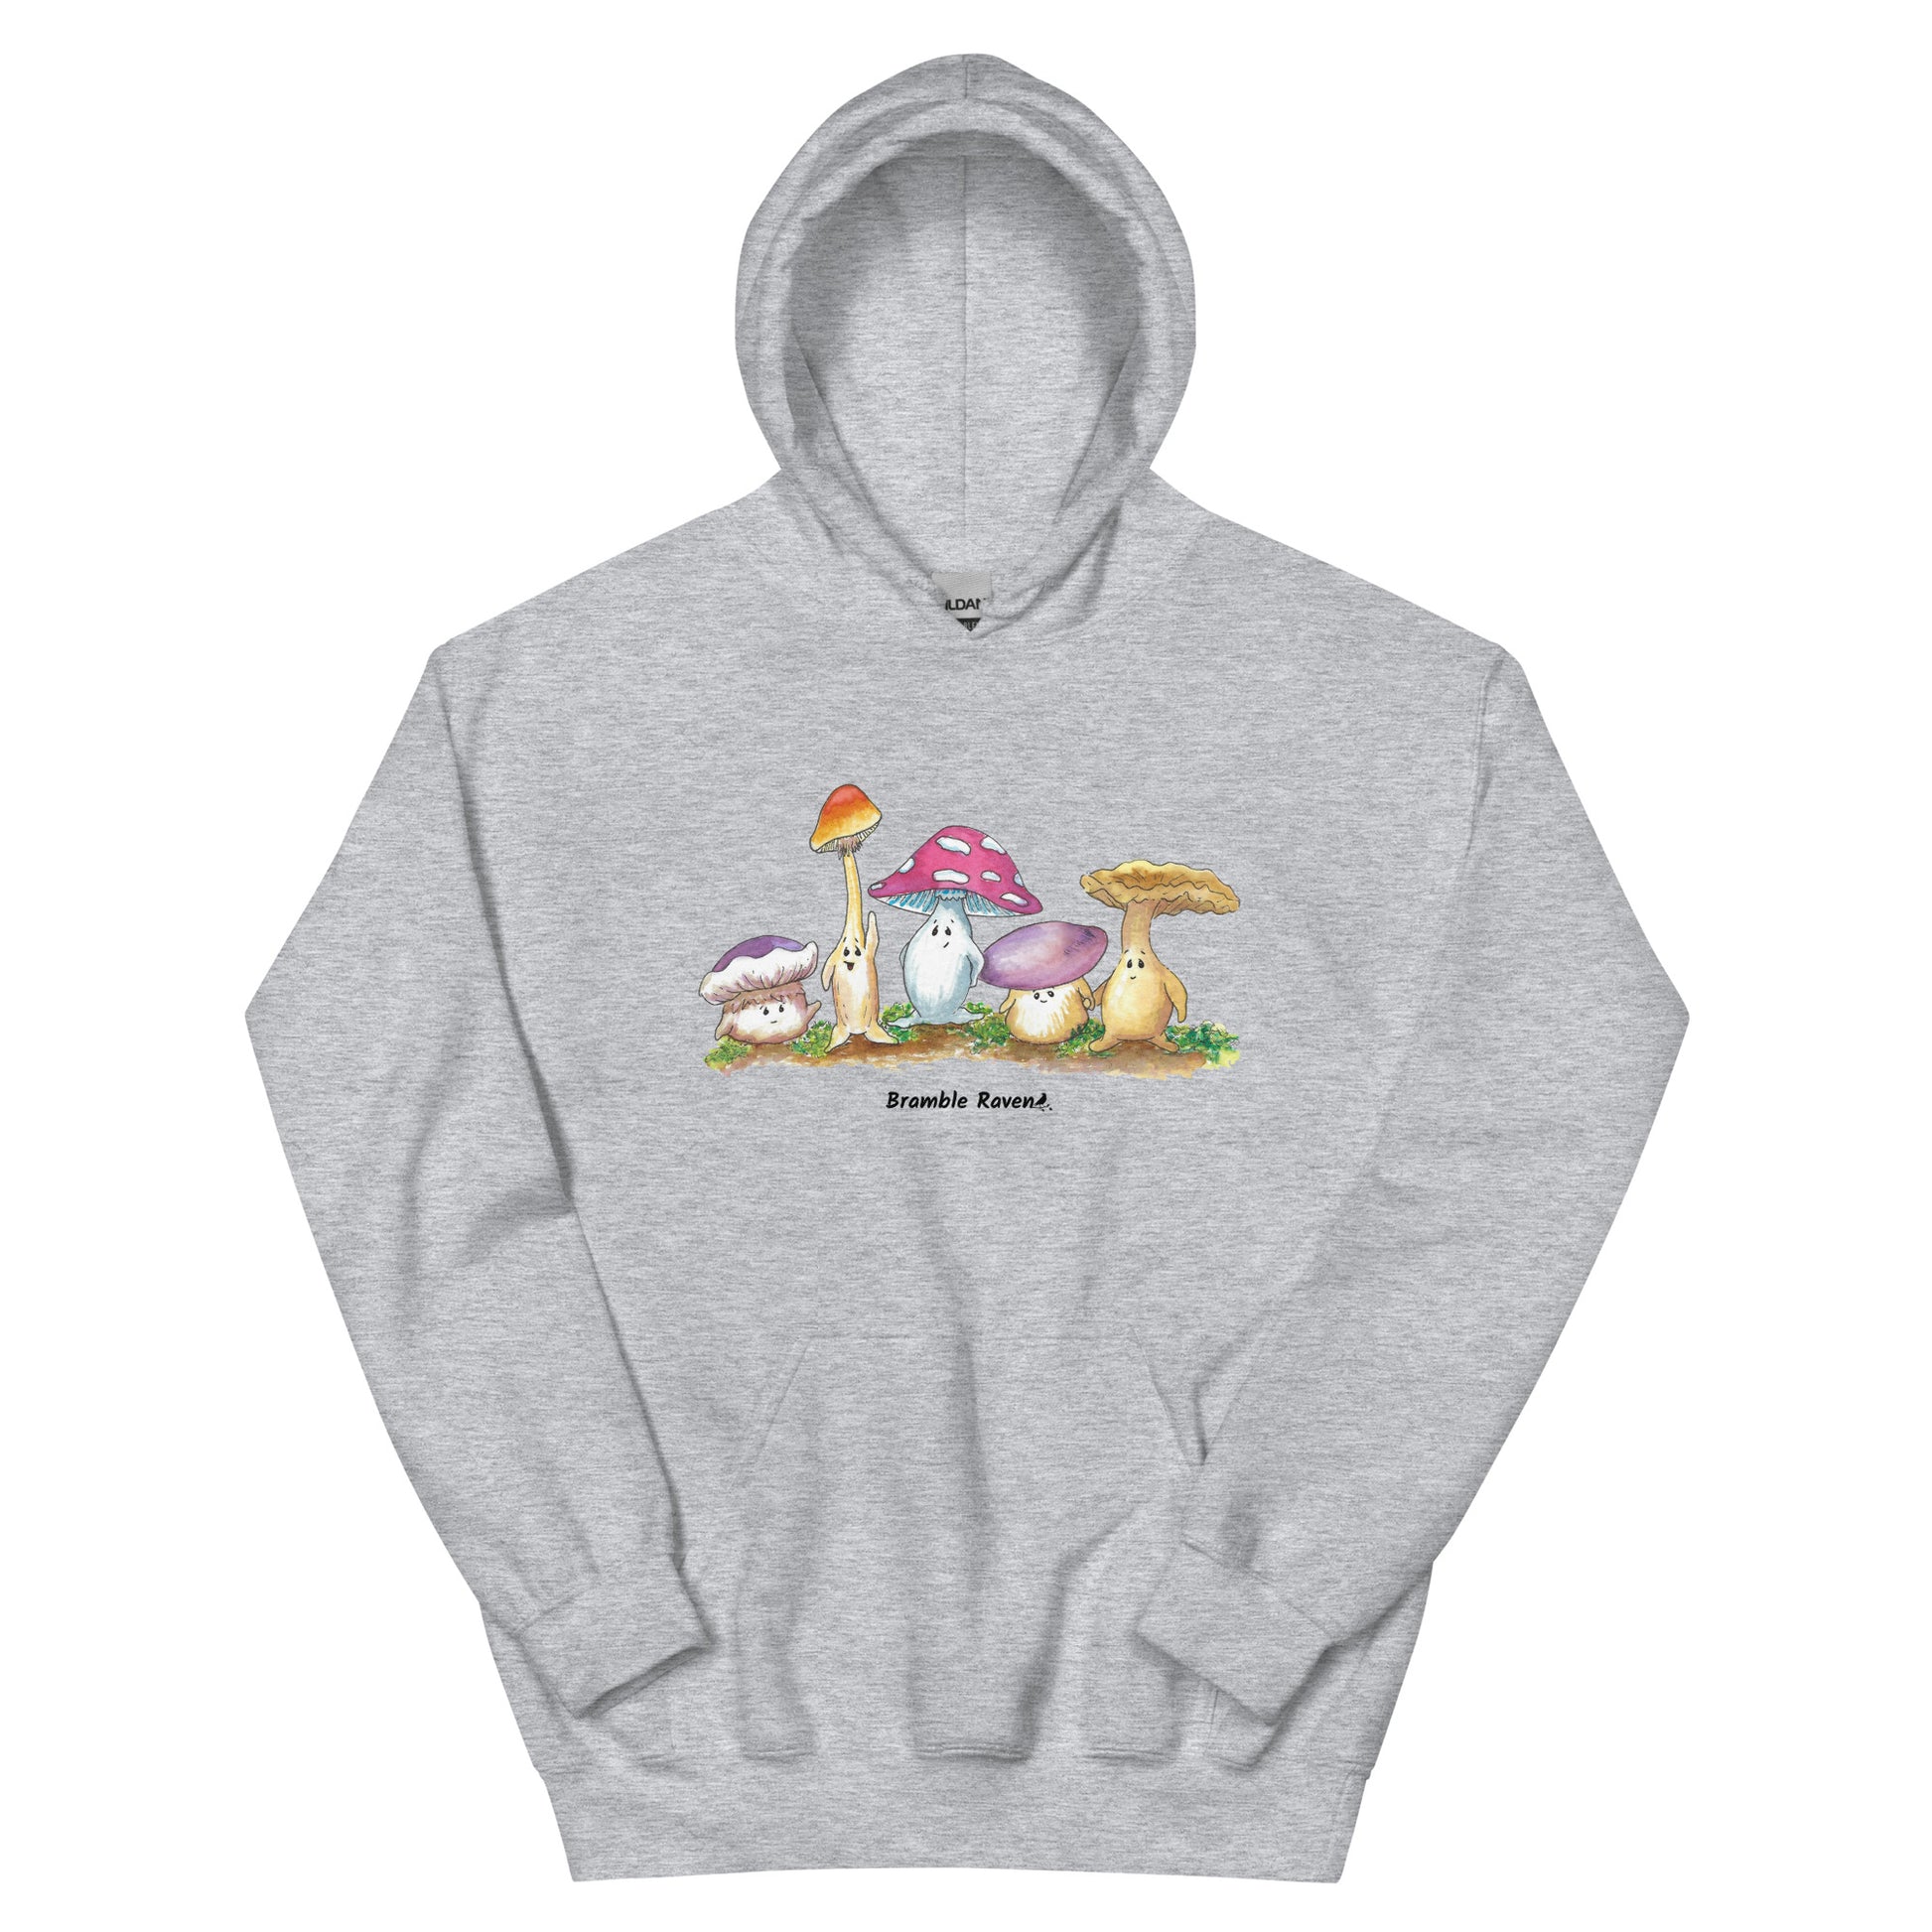 Sport grey colored unisex cotton/polyester blend hoodie. Features front design of Mushy and his whimsical mushroom friends. Hoodie has double lined hood, front pouch pocket, rib knit cuffs and stretchy waistband.